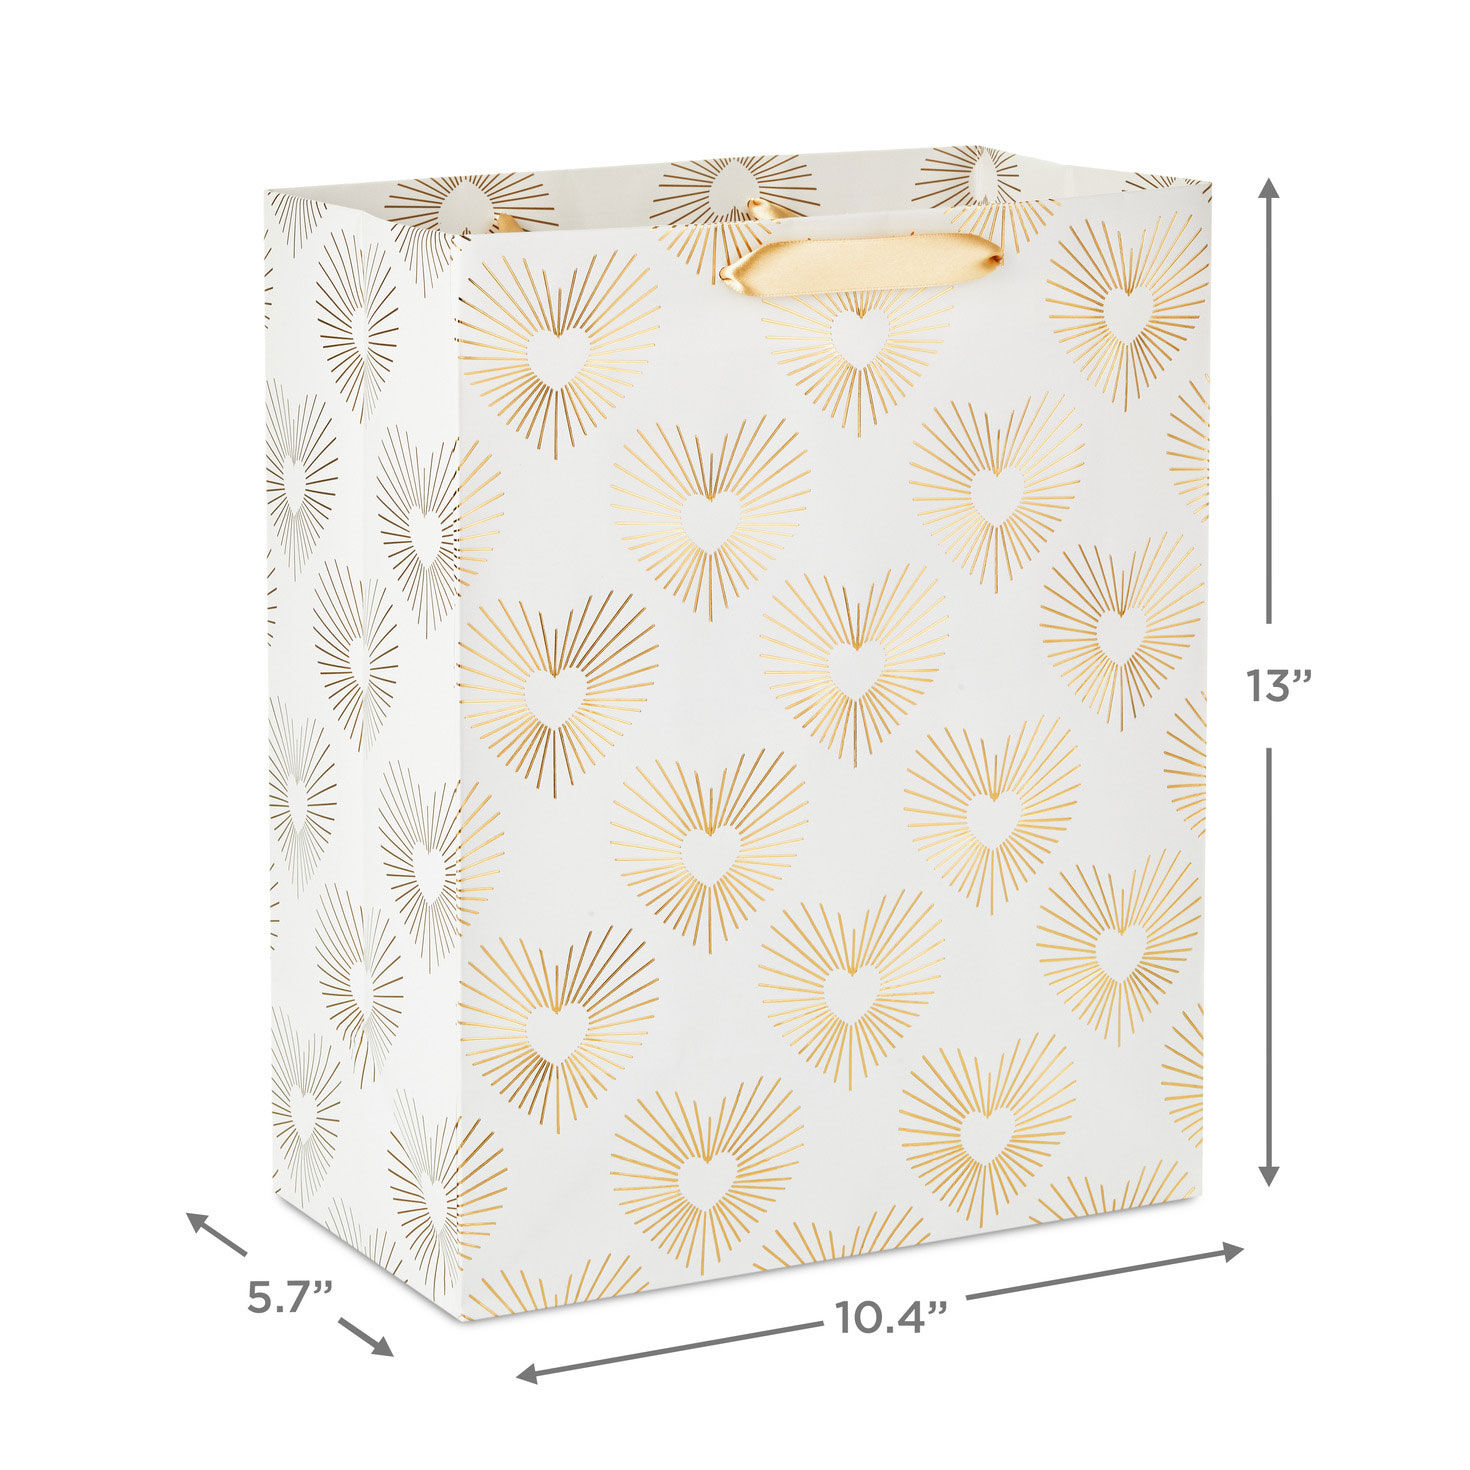 13" Gold Hearts on White Large Gift Bag for only USD 4.99 | Hallmark